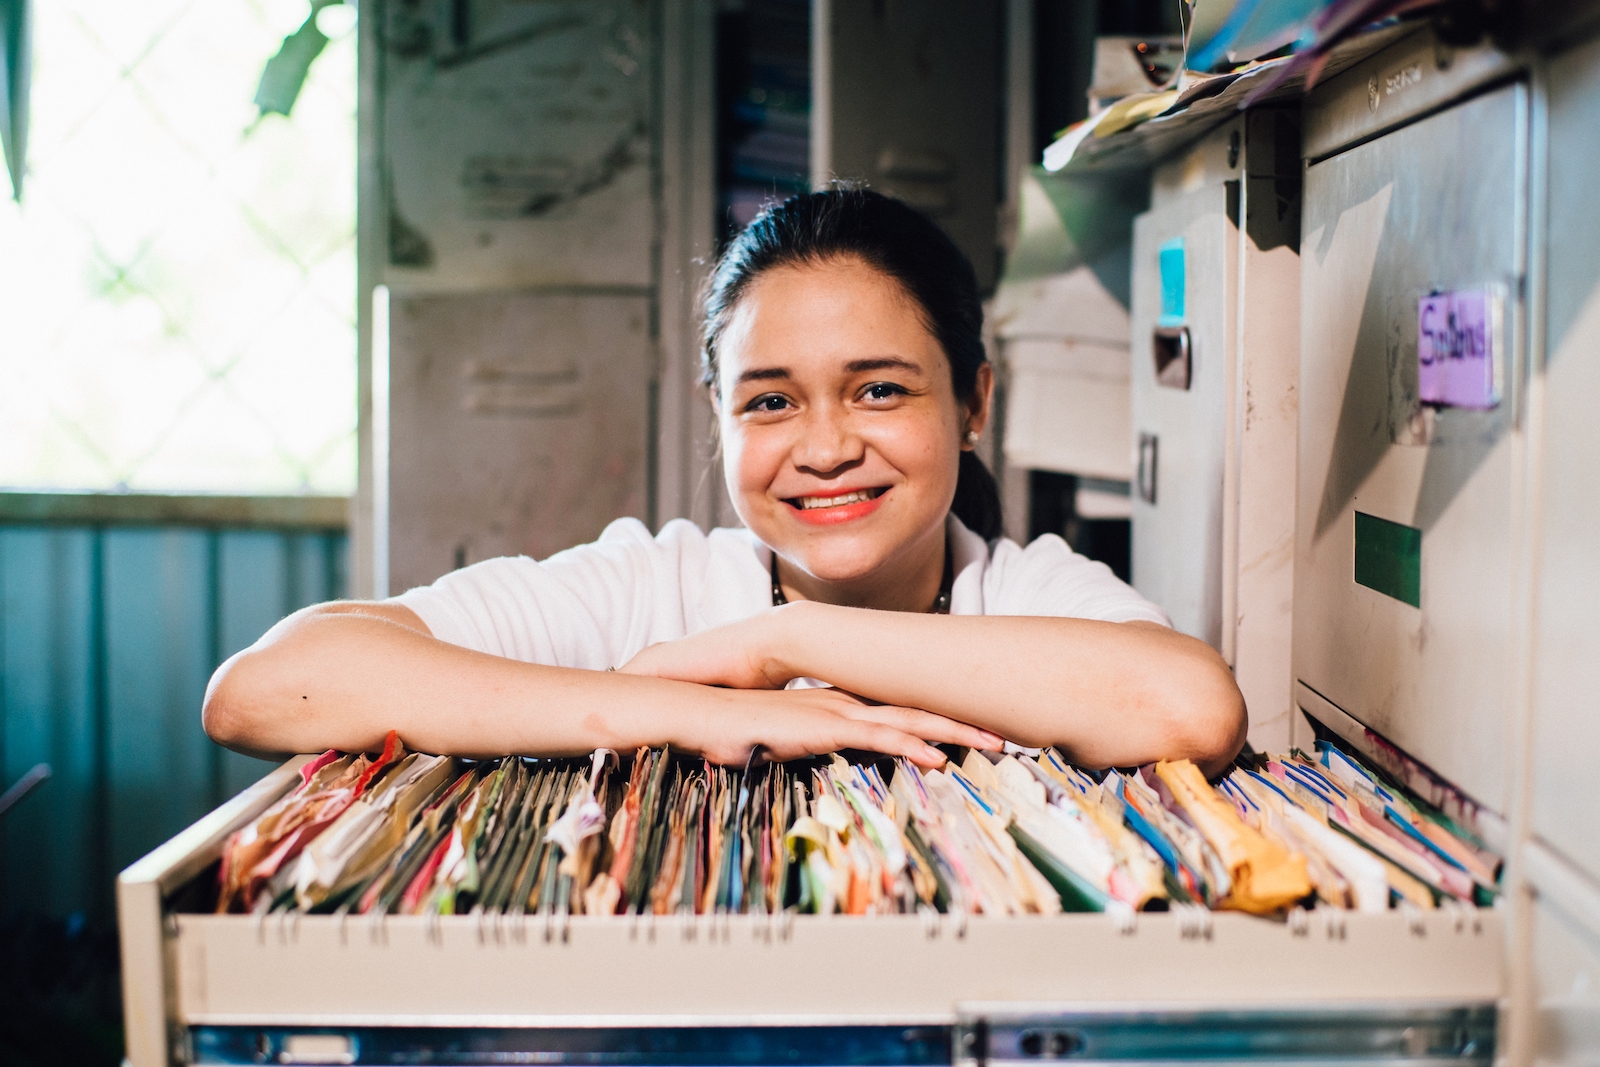 A woman leans on a drawer of file folders, smiling, showing the relation between poverty and research.